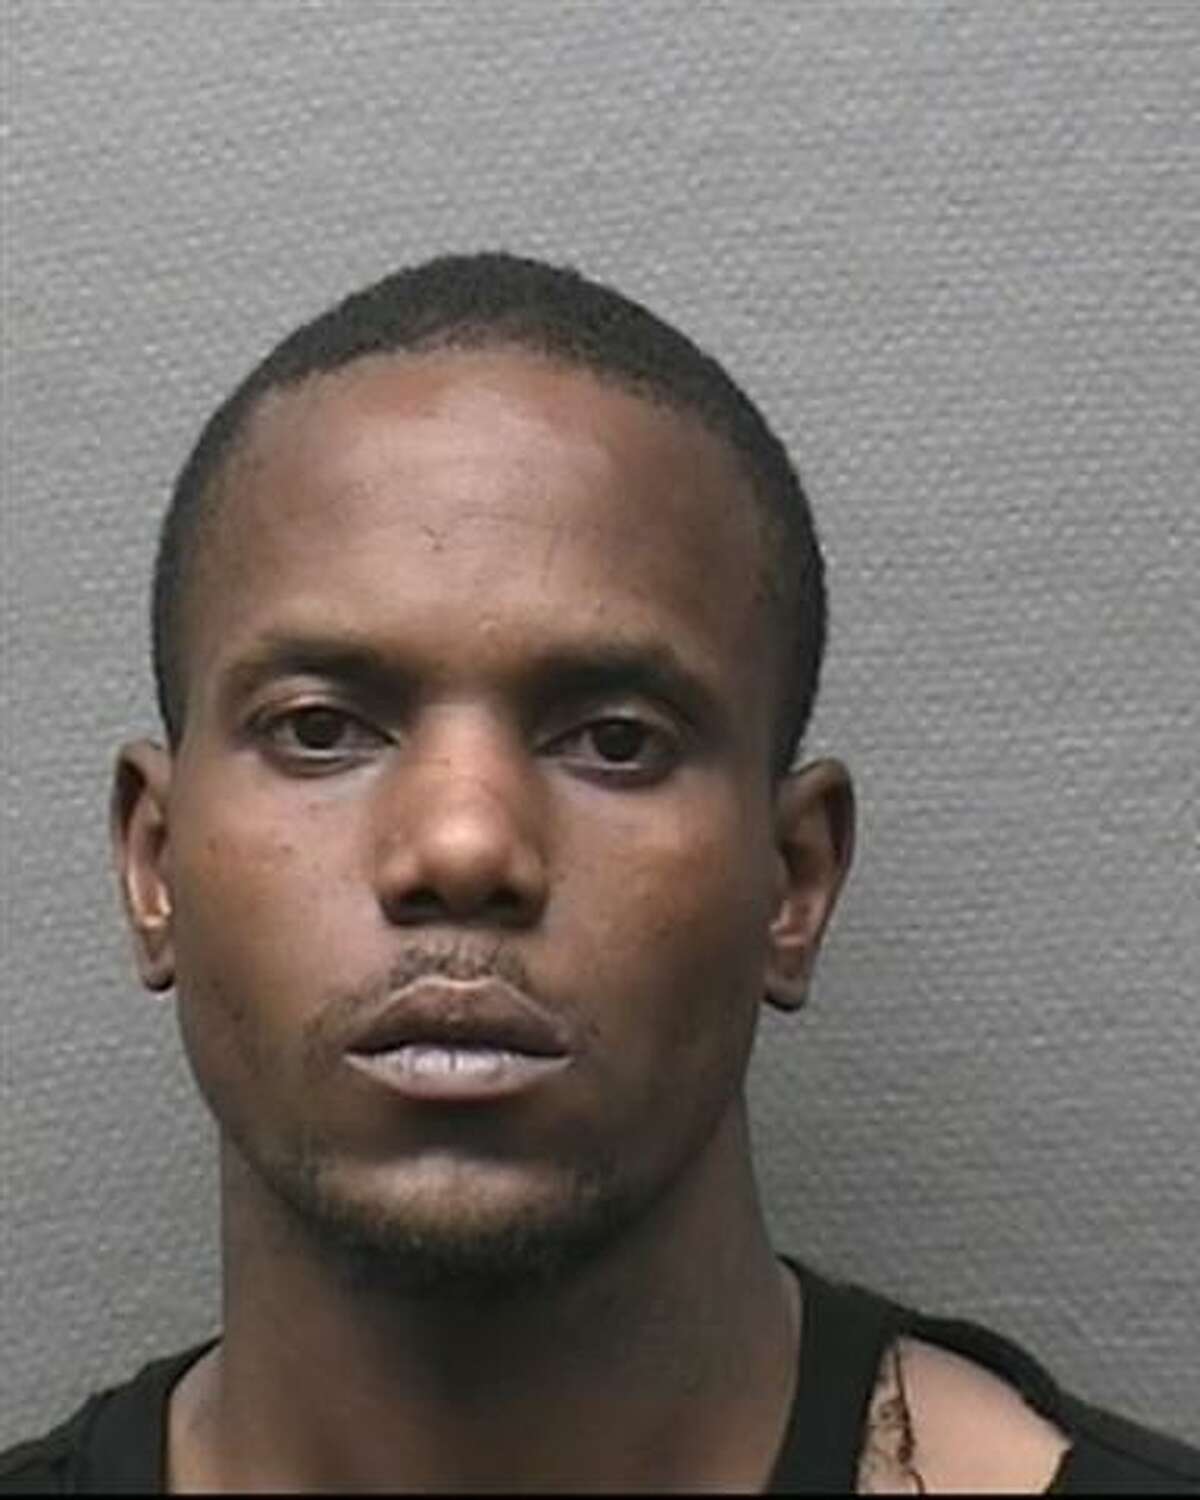 Harris County releases mug shots of five most wanted fugitives